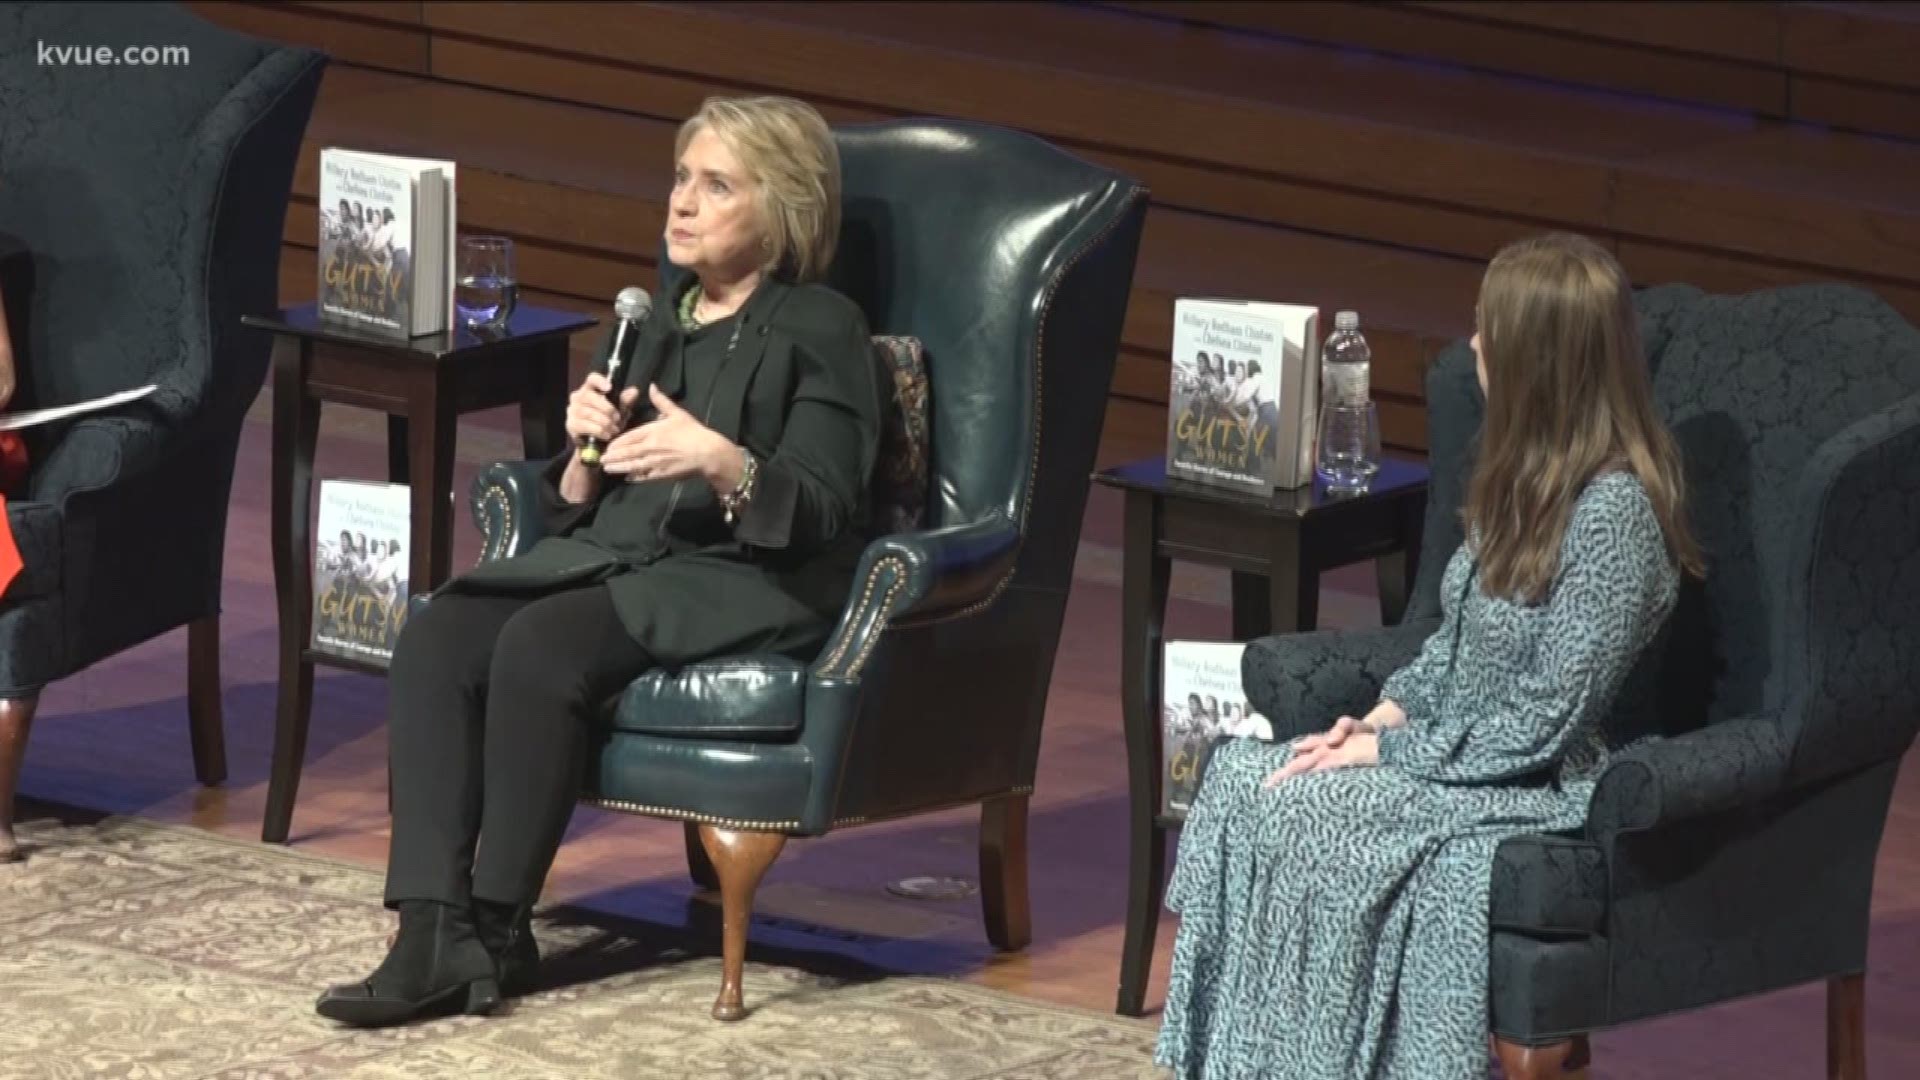 Hillary and Chelsea Clinton were in Austin promoting their new book: "The Book of Gutsy Women: Favorite Stories of Courage and Resilience."